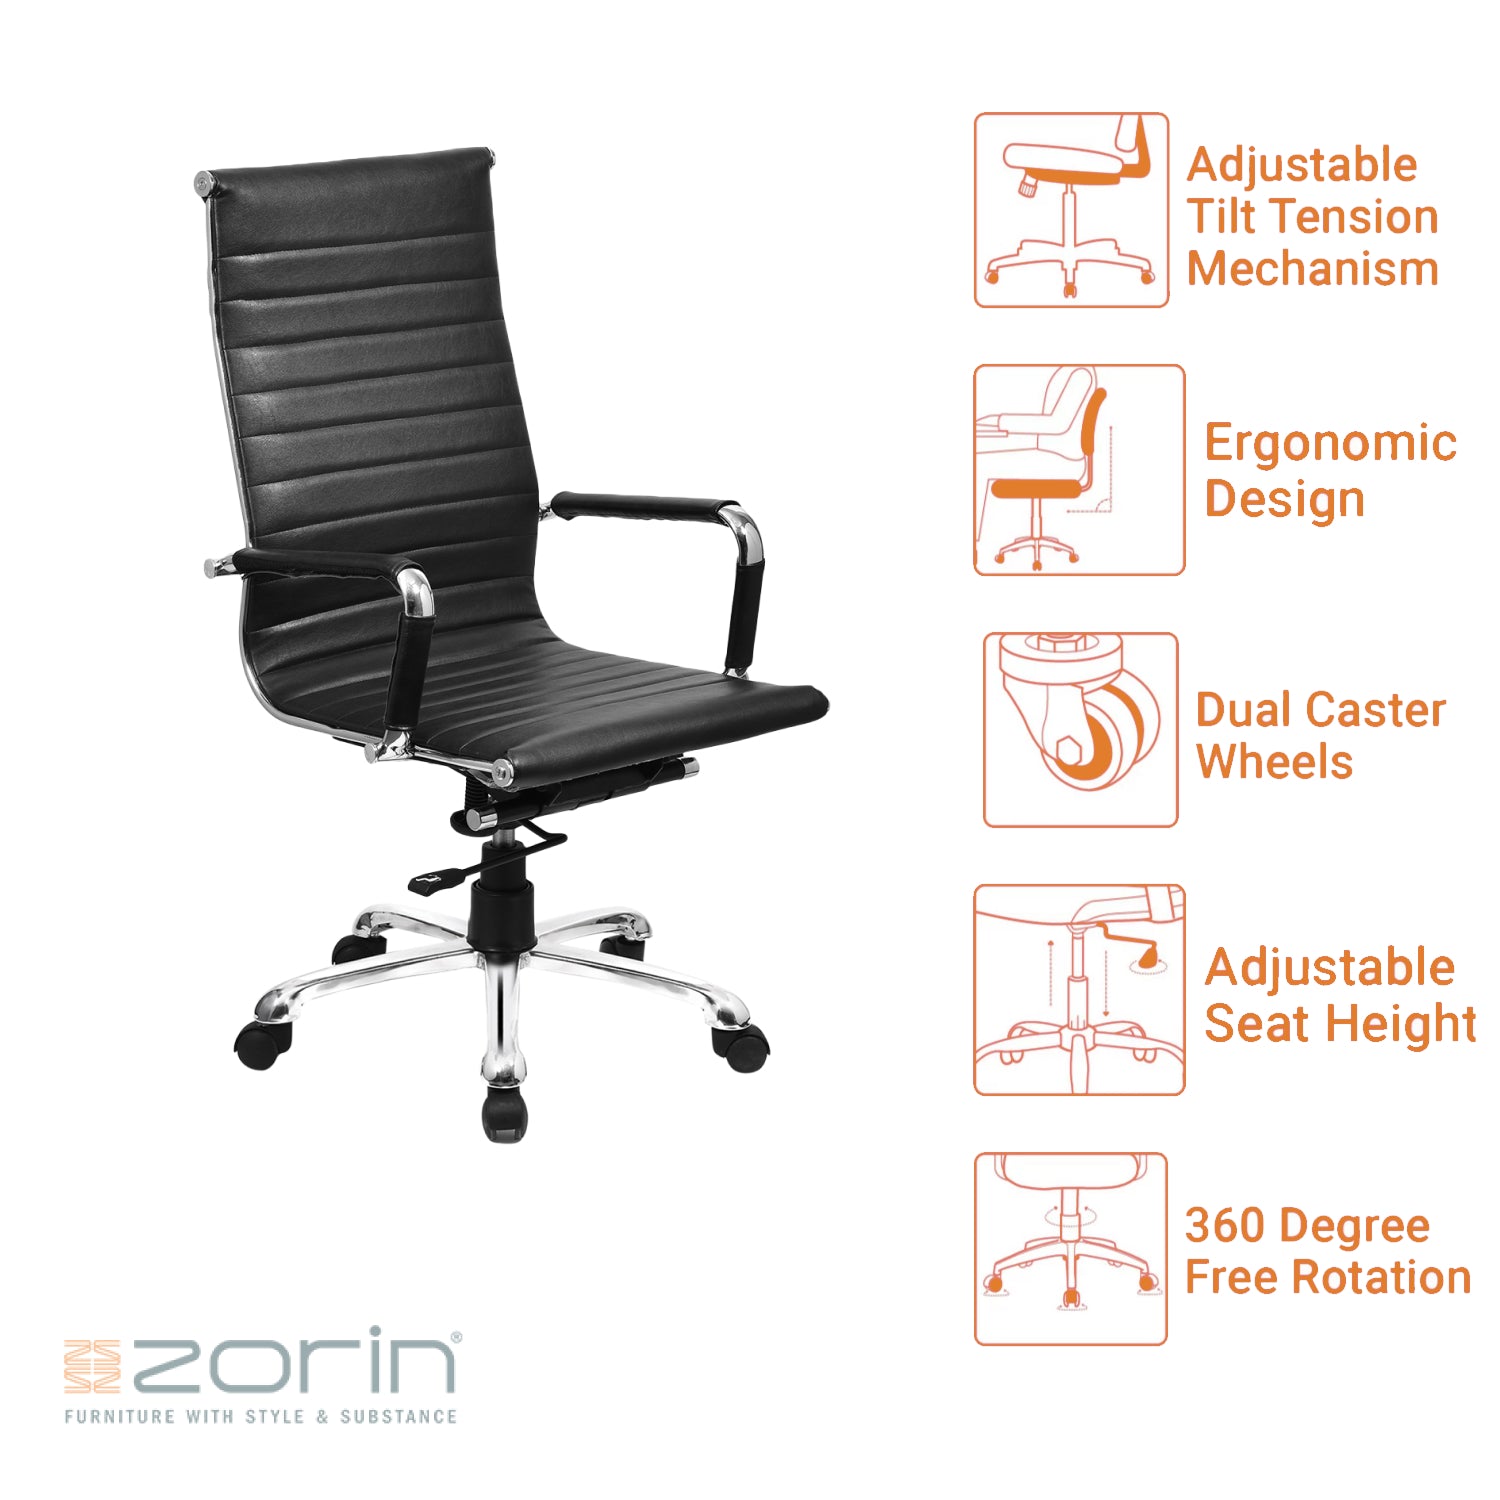 ZSE1032 High Back Chair by Zorin in Black Color Zorin